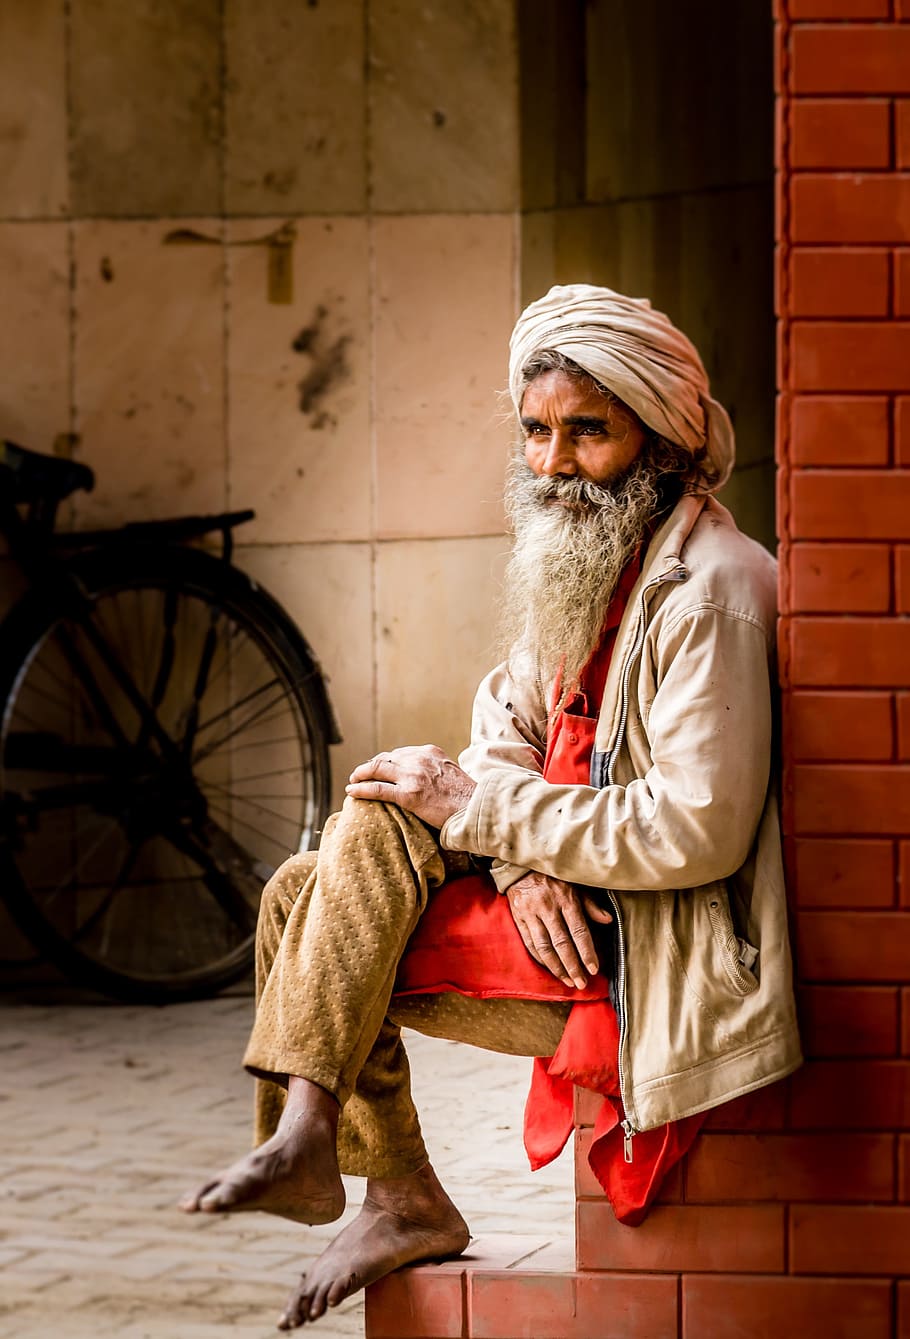 man, sitting, brick wall, indians, portrait, human, turban, face, one person, clothing